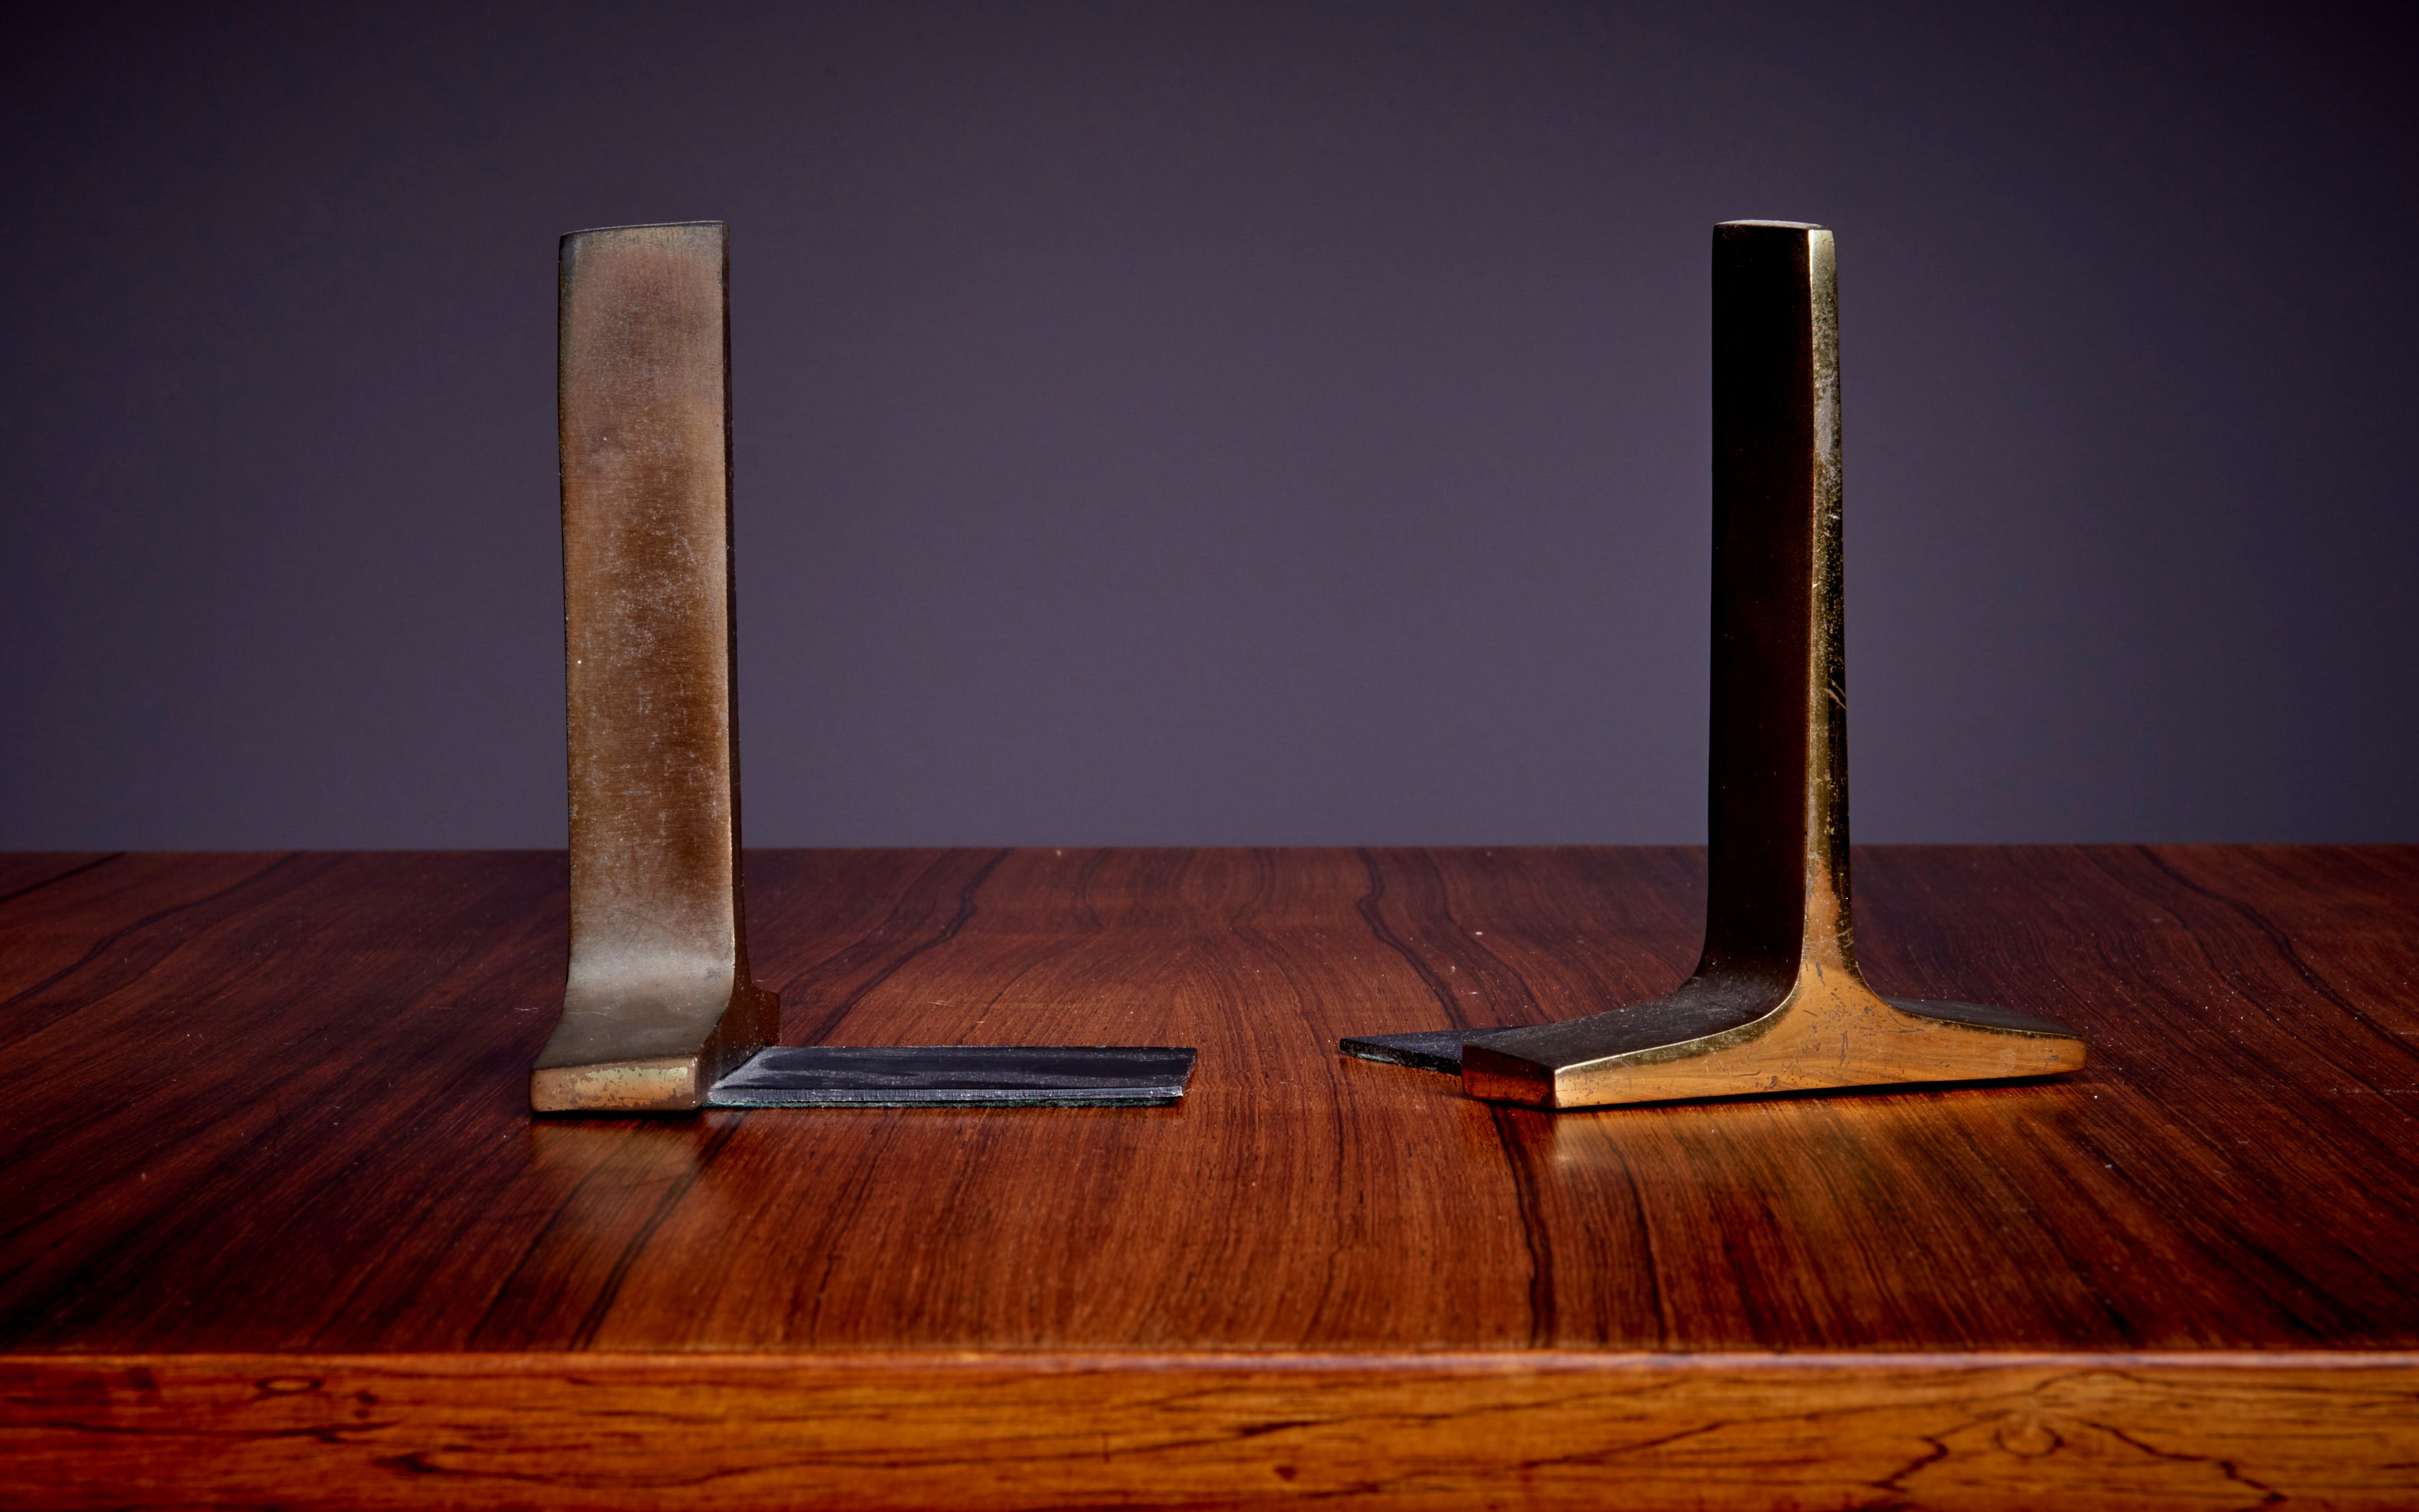 Modernist bronze bookends by Ben Seibel in good condition. Ben Seibel (1918-1985) was an American industrial designer who worked primarily in the mid-20th century. He was known for his versatile and prolific design output, which included a wide